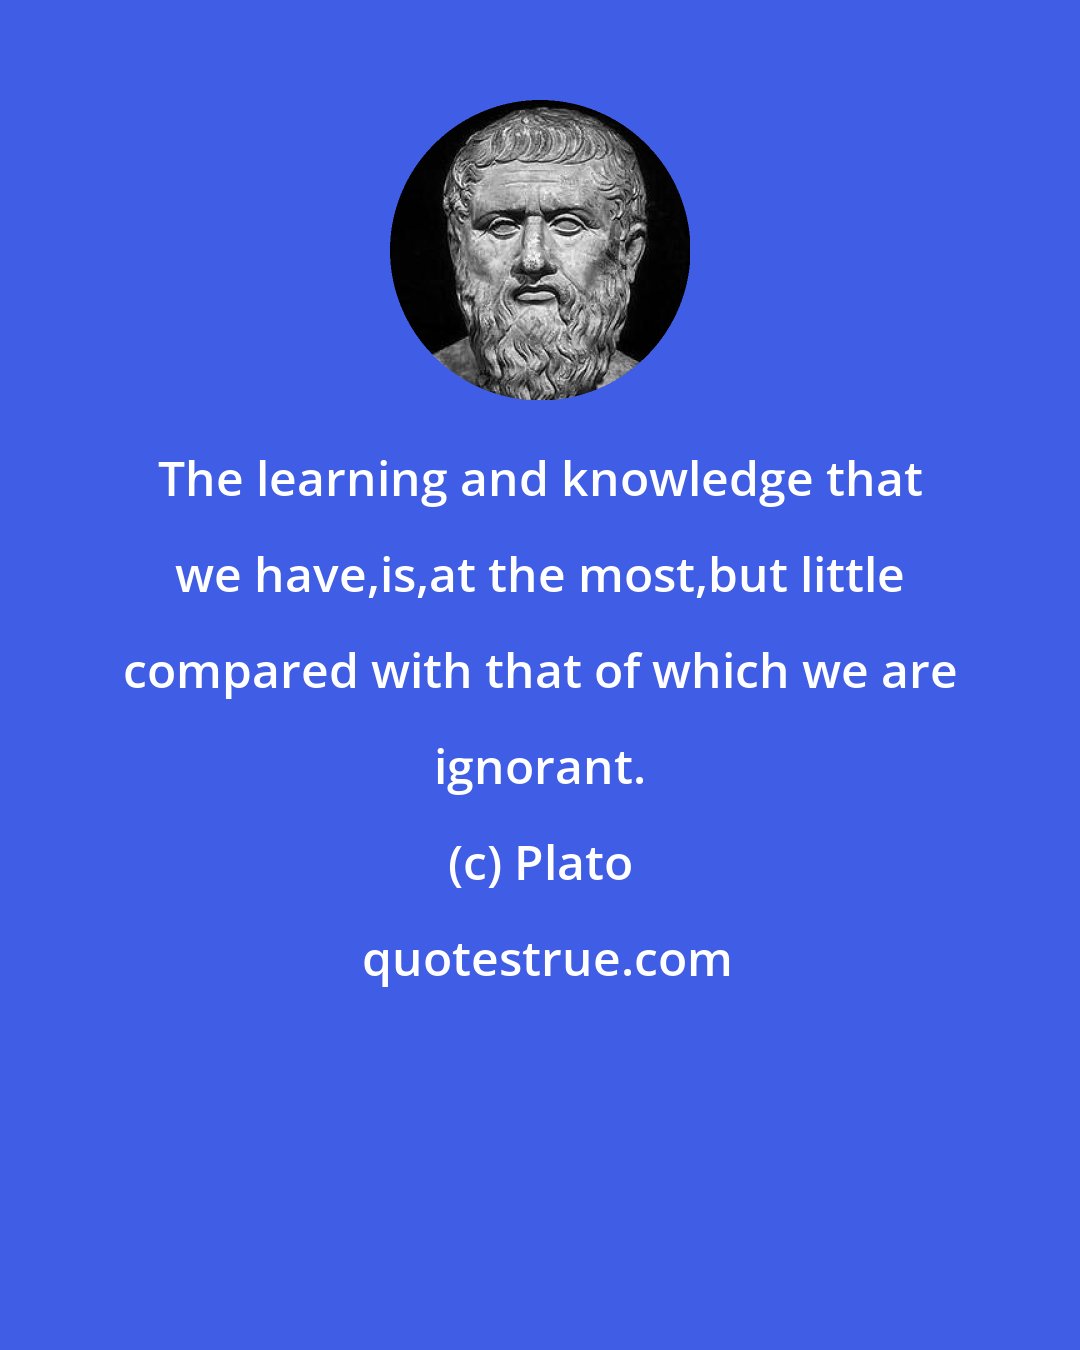 Plato: The learning and knowledge that we have,is,at the most,but little compared with that of which we are ignorant.